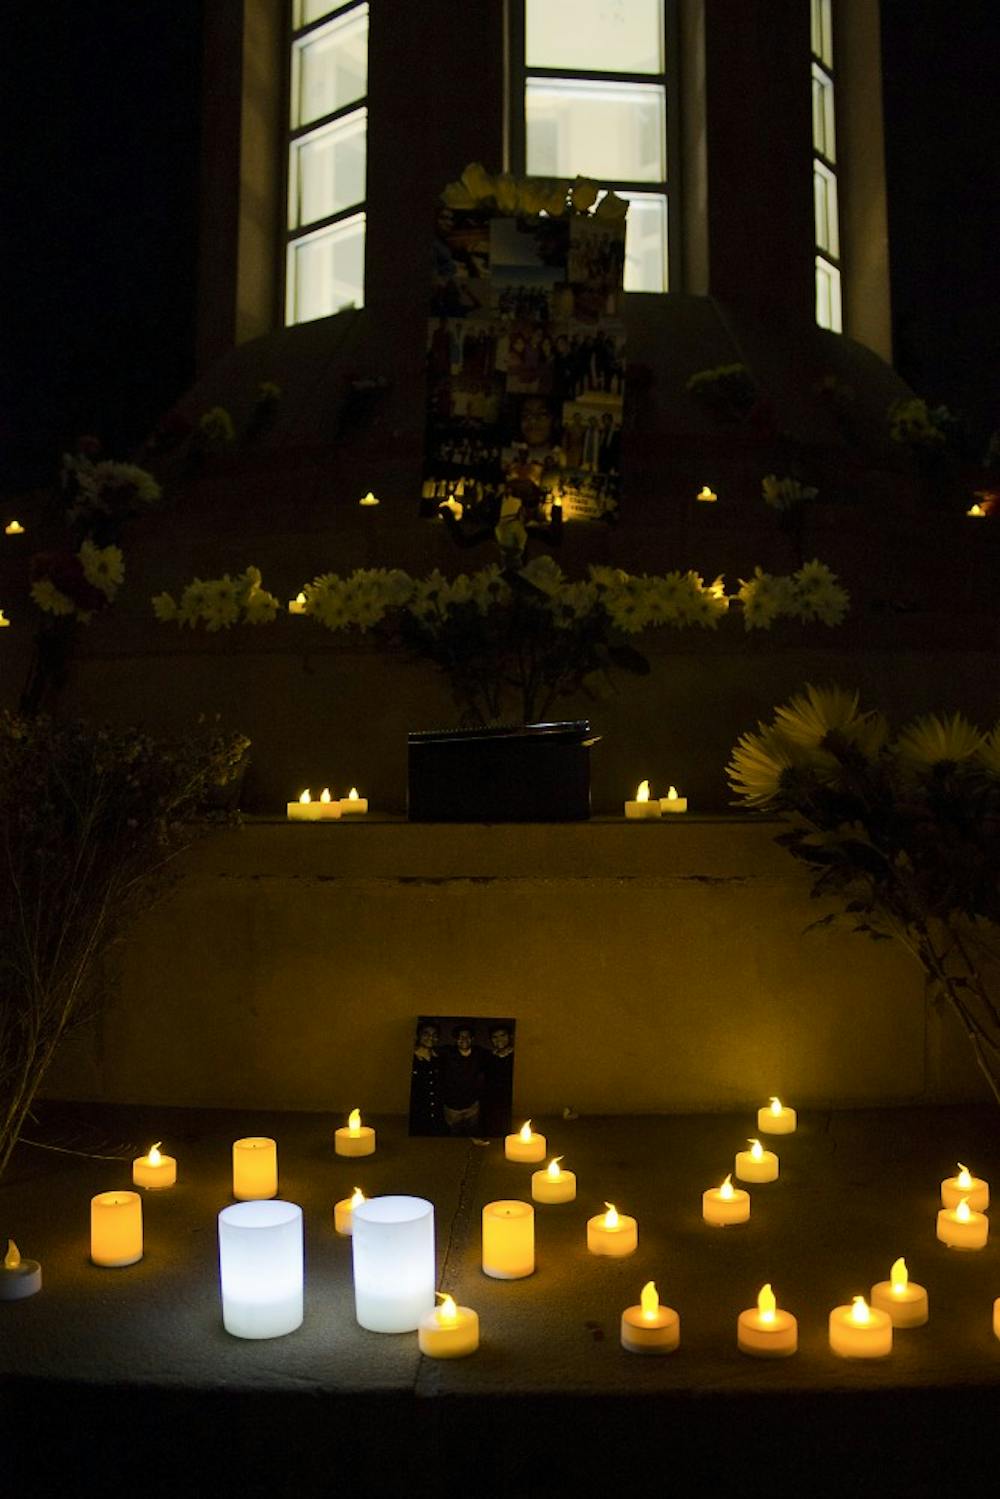 Friends and family lit candles during the vigil on Feb. 19, 2015, at Hayden Lawn in memory of an ASU student. (Shiva Balasubramanian/ The State Press)